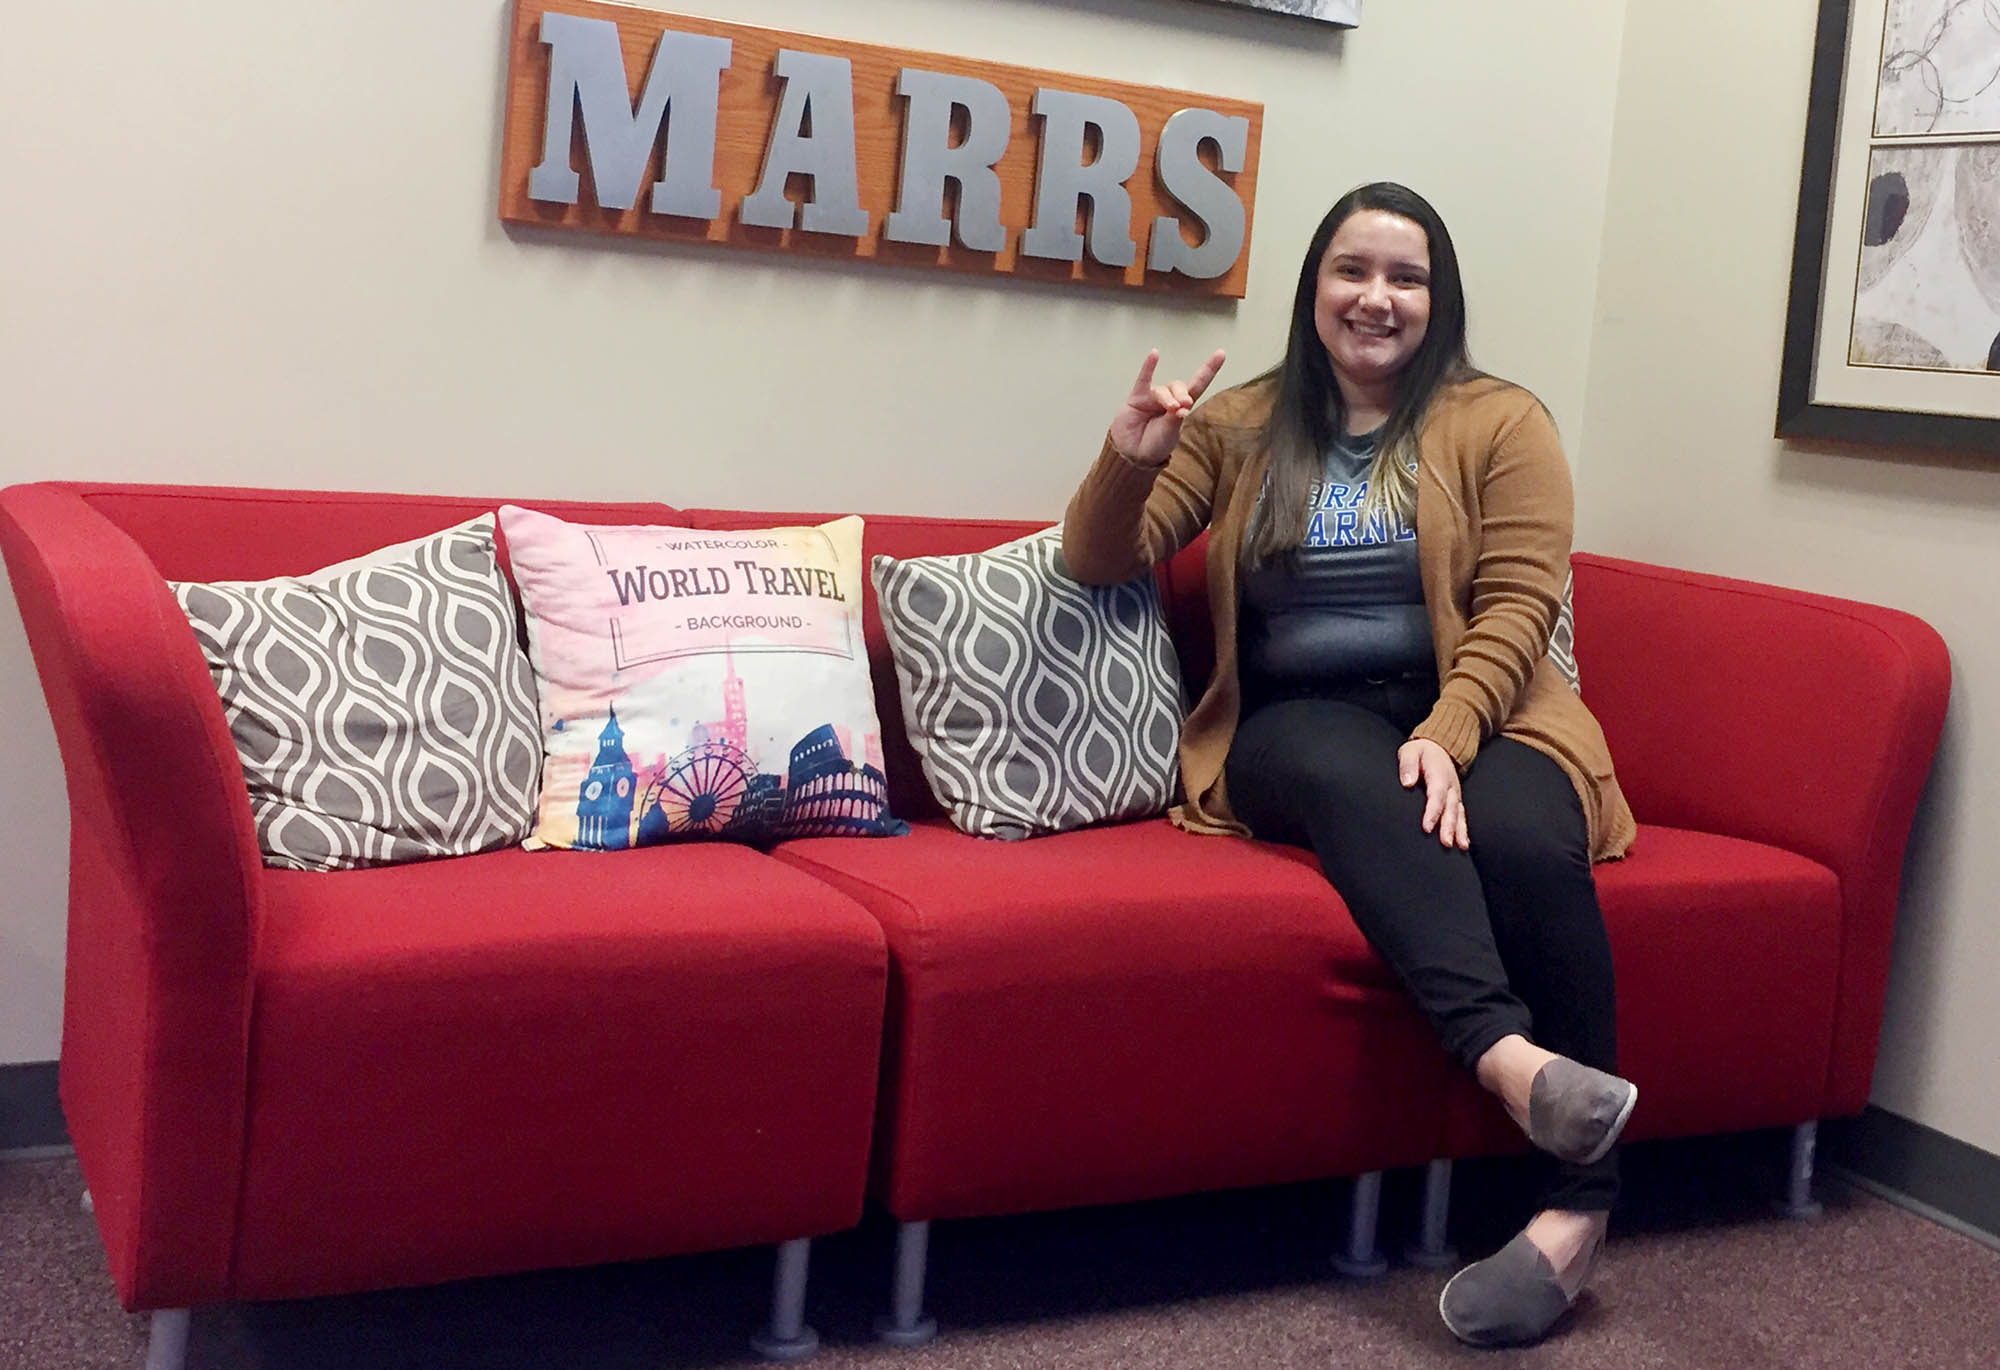 UNK senior Emely Diaz, who is student teaching this semester at RM Marrs Magnet Center in her hometown of Omaha, will graduate in December with a degree in middle grades education. “I had very positive role models in my education, especially my math and science teachers. That’s why I love those subjects and why I want to be a math and science teacher,” she said. “I saw the impact they had on me, and I want to have the same impact on students’ lives and be a positive role model they can look up to.” (Courtesy photos)